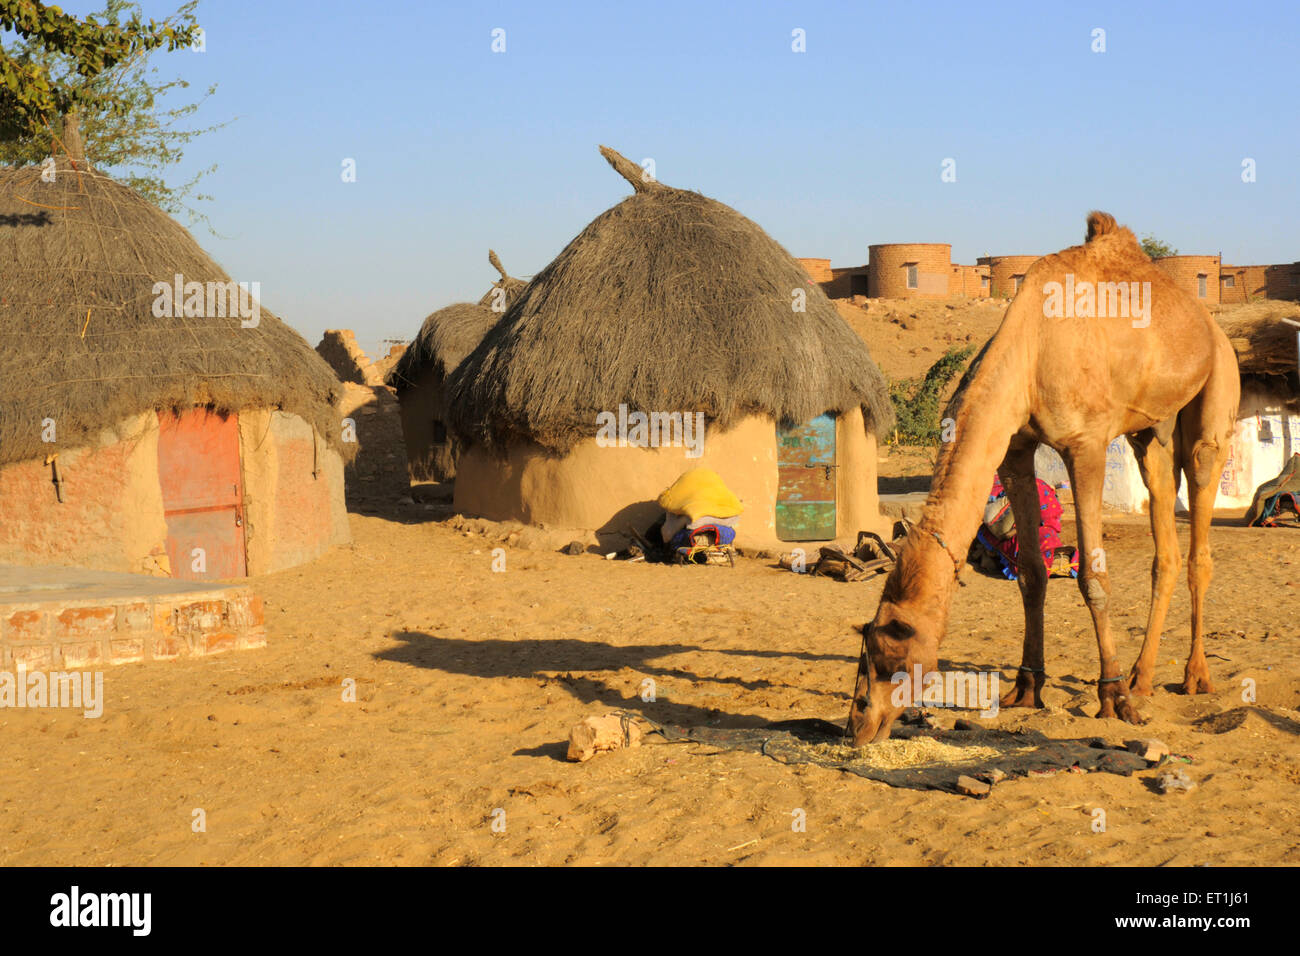 Camel feeding with huts in background at Sam Sand dunes ; Jaisalmer ; Rajasthan ; India Stock Photo